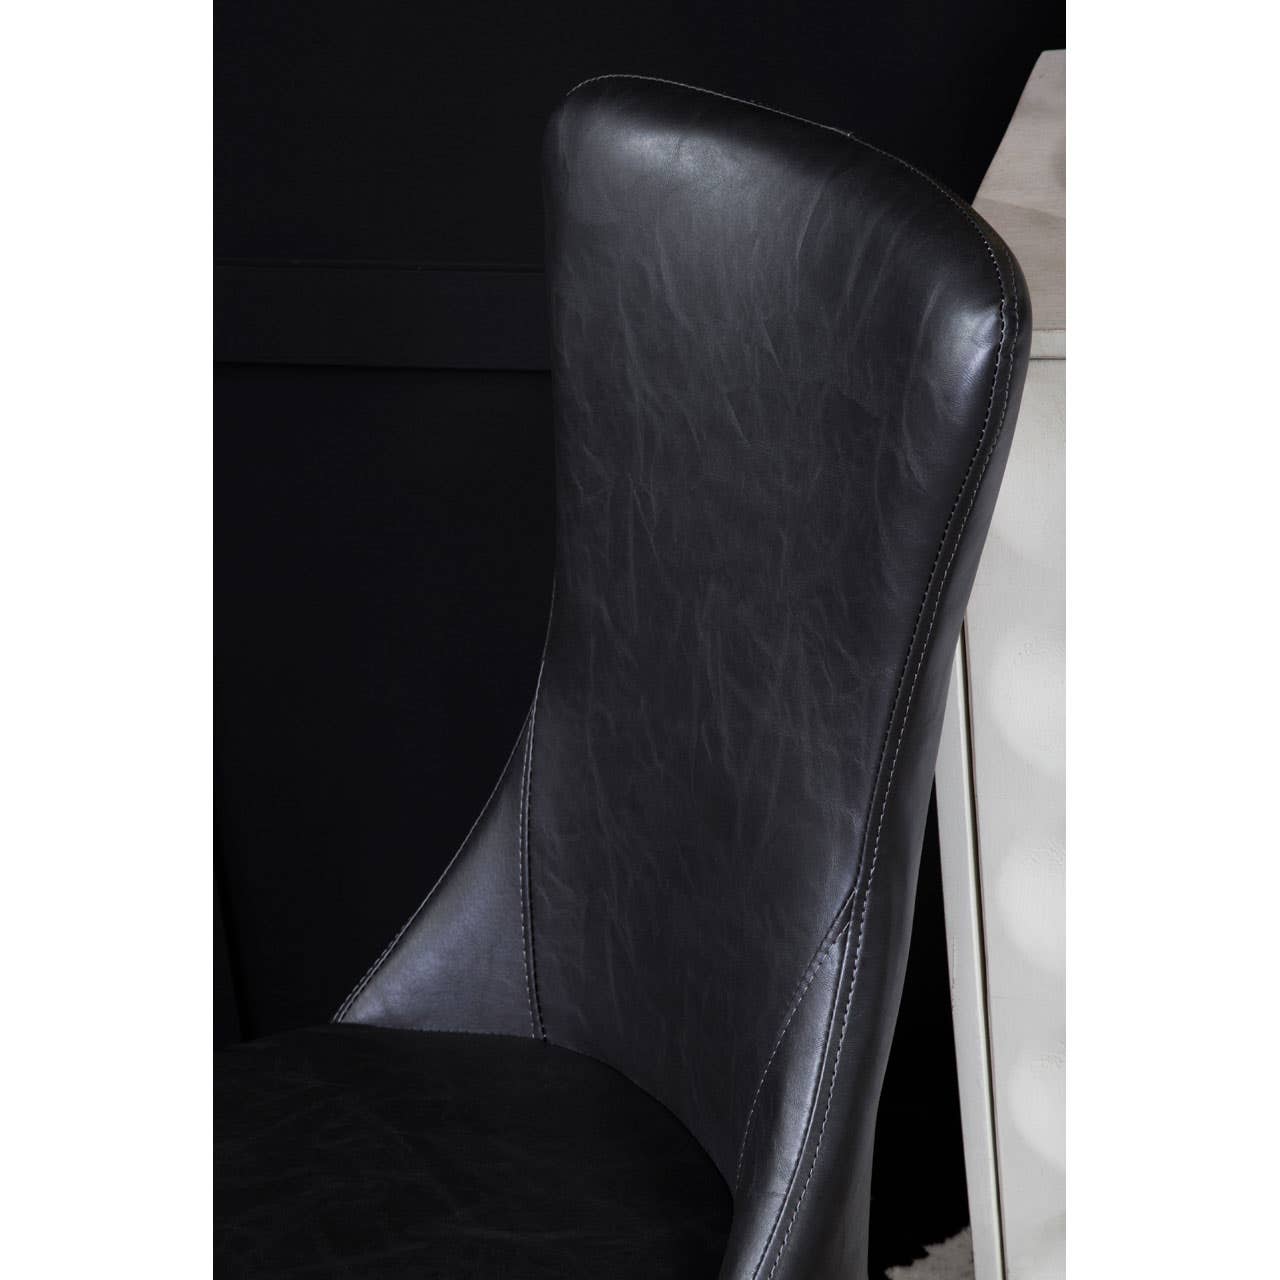 Noosa & Co. Dining Forli Black Dining Chair House of Isabella UK